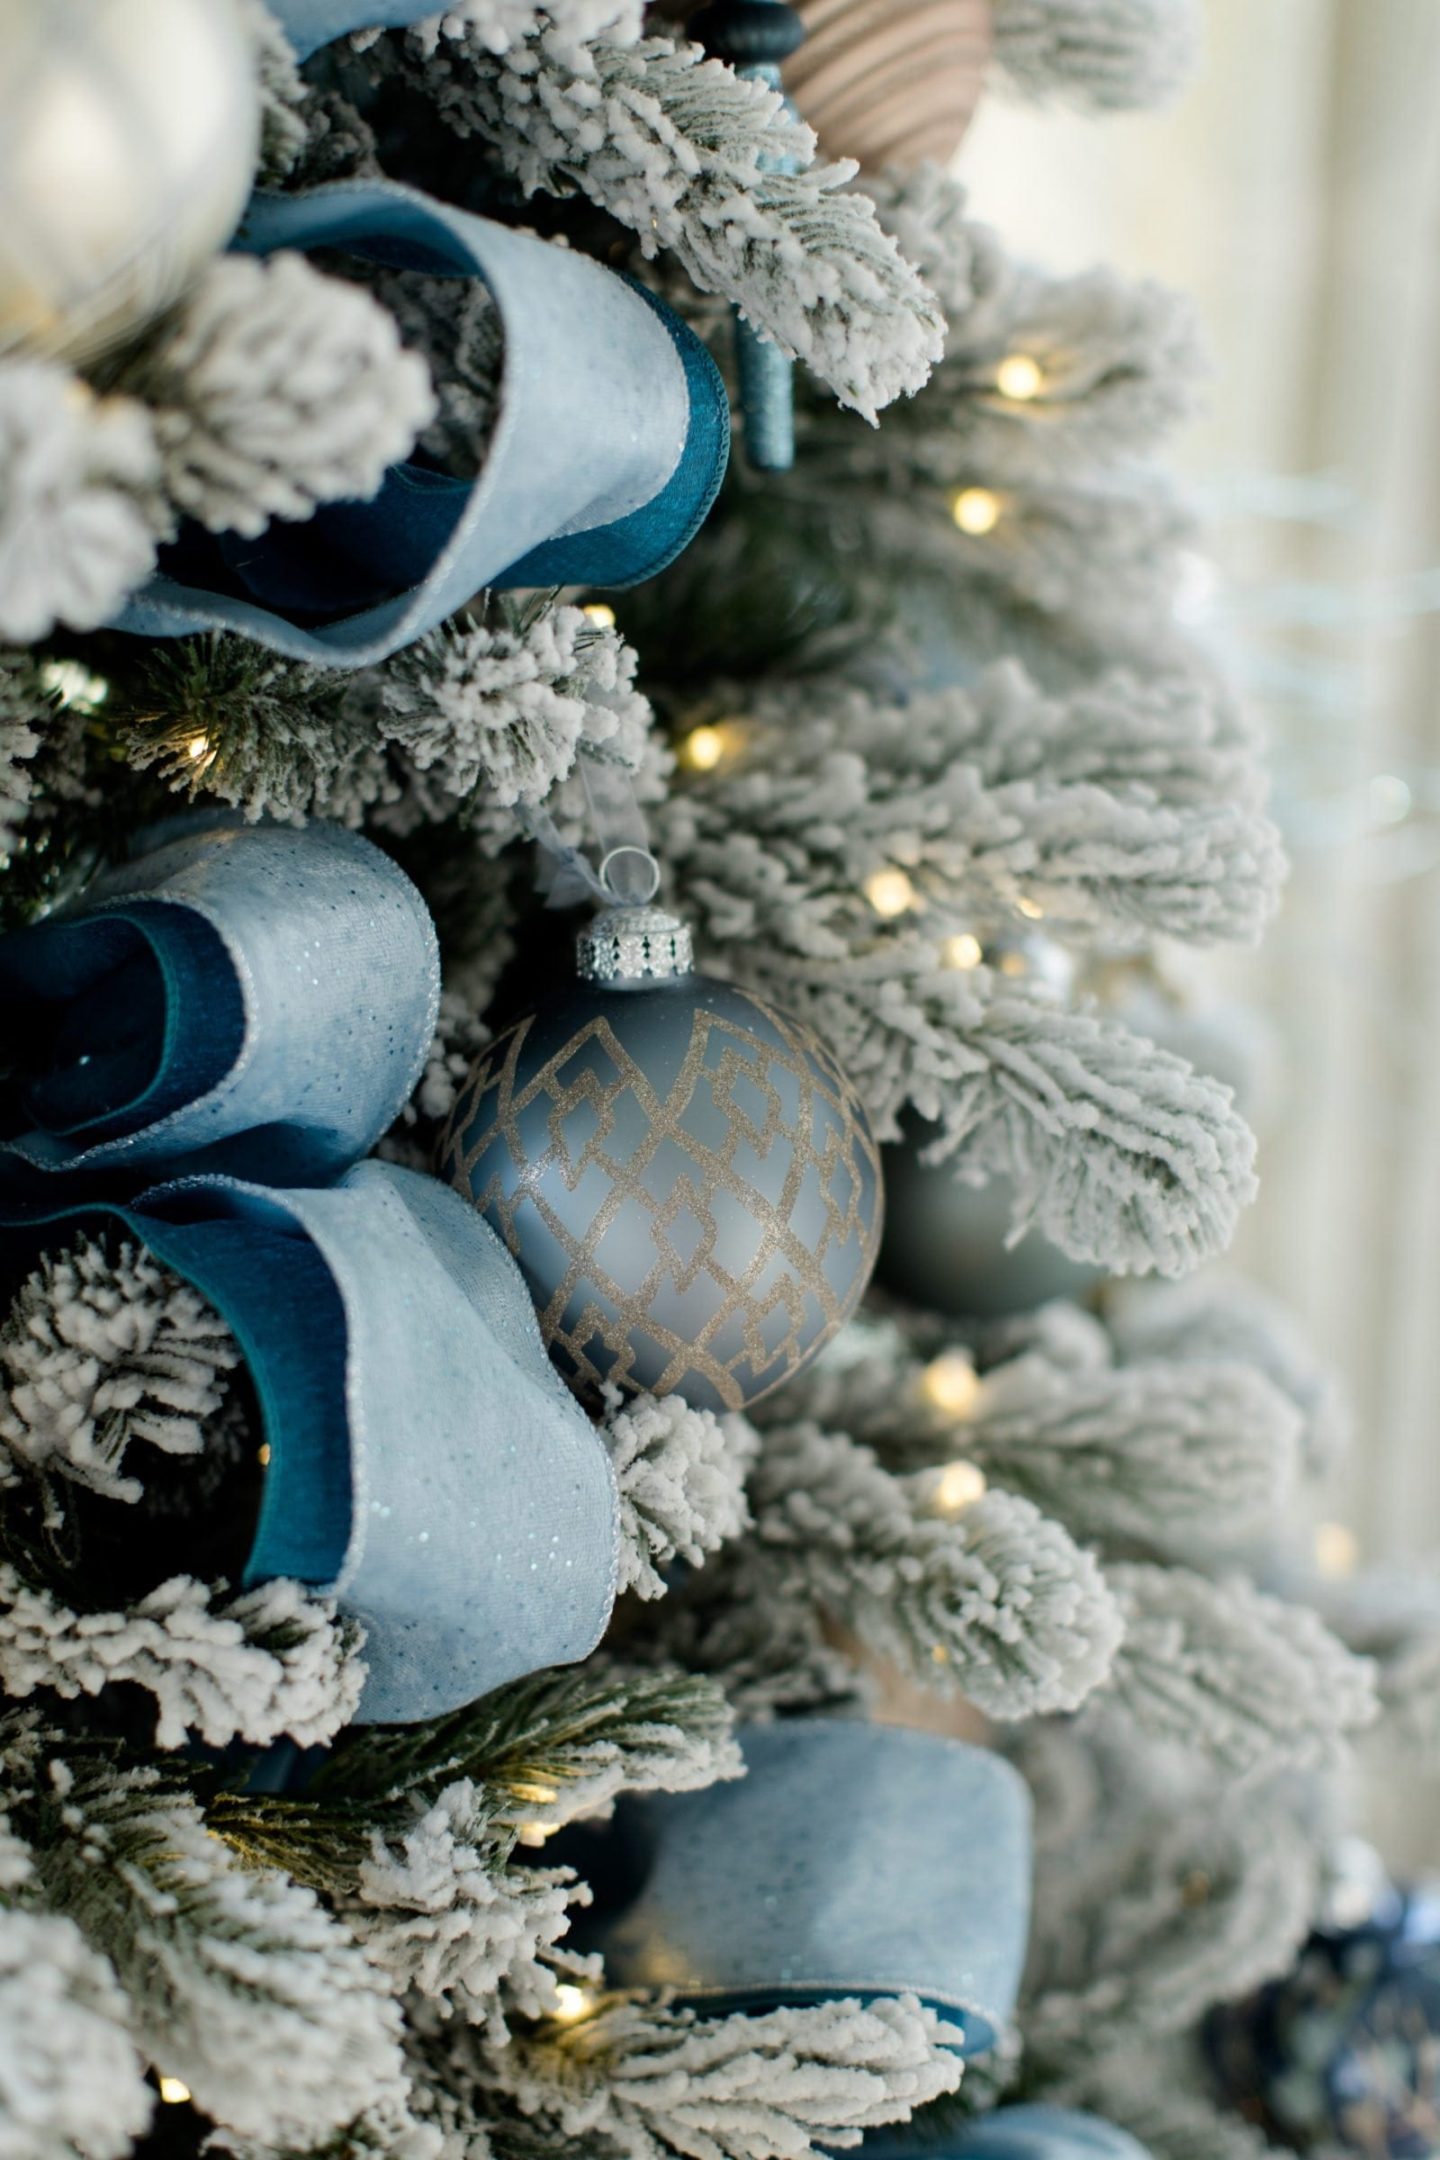 Light blue christmas ornaments with blue Christmas ball ornaments from Frontgate on flocked Christmas tree.